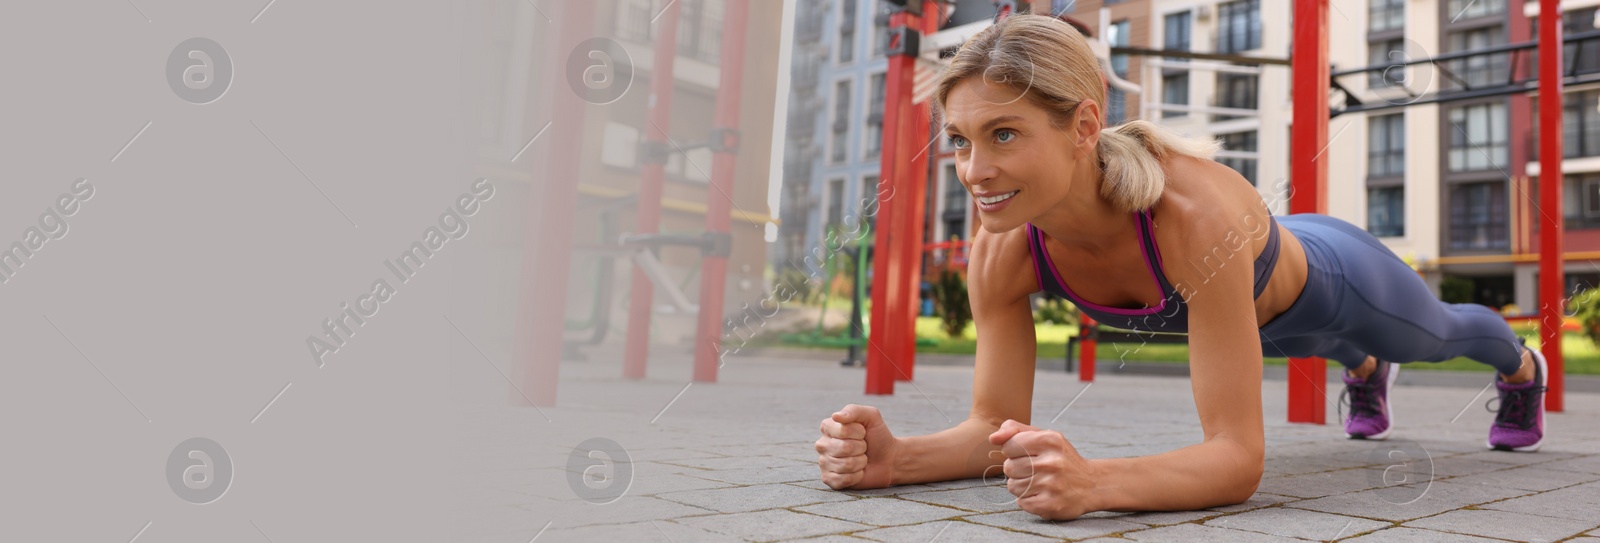 Image of Happy woman doing plank exercise at outdoor gym, space for text. Banner design